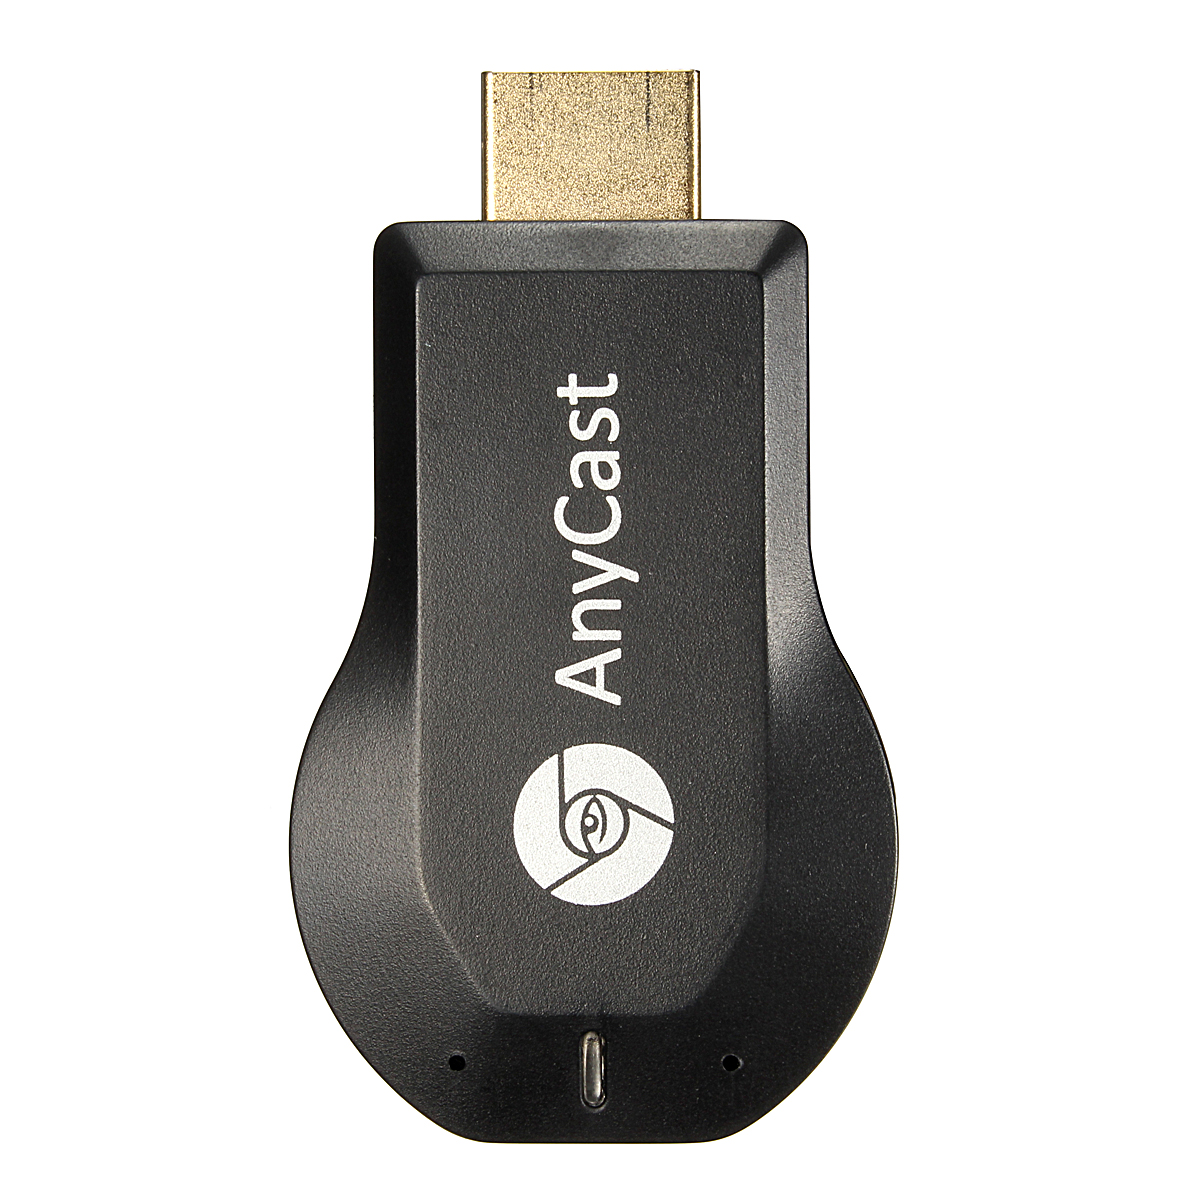 

AnyCast M2 Plus WiFi Display Dongle Miracast TV Dongle HDMI DLNA AirPlay 1080P